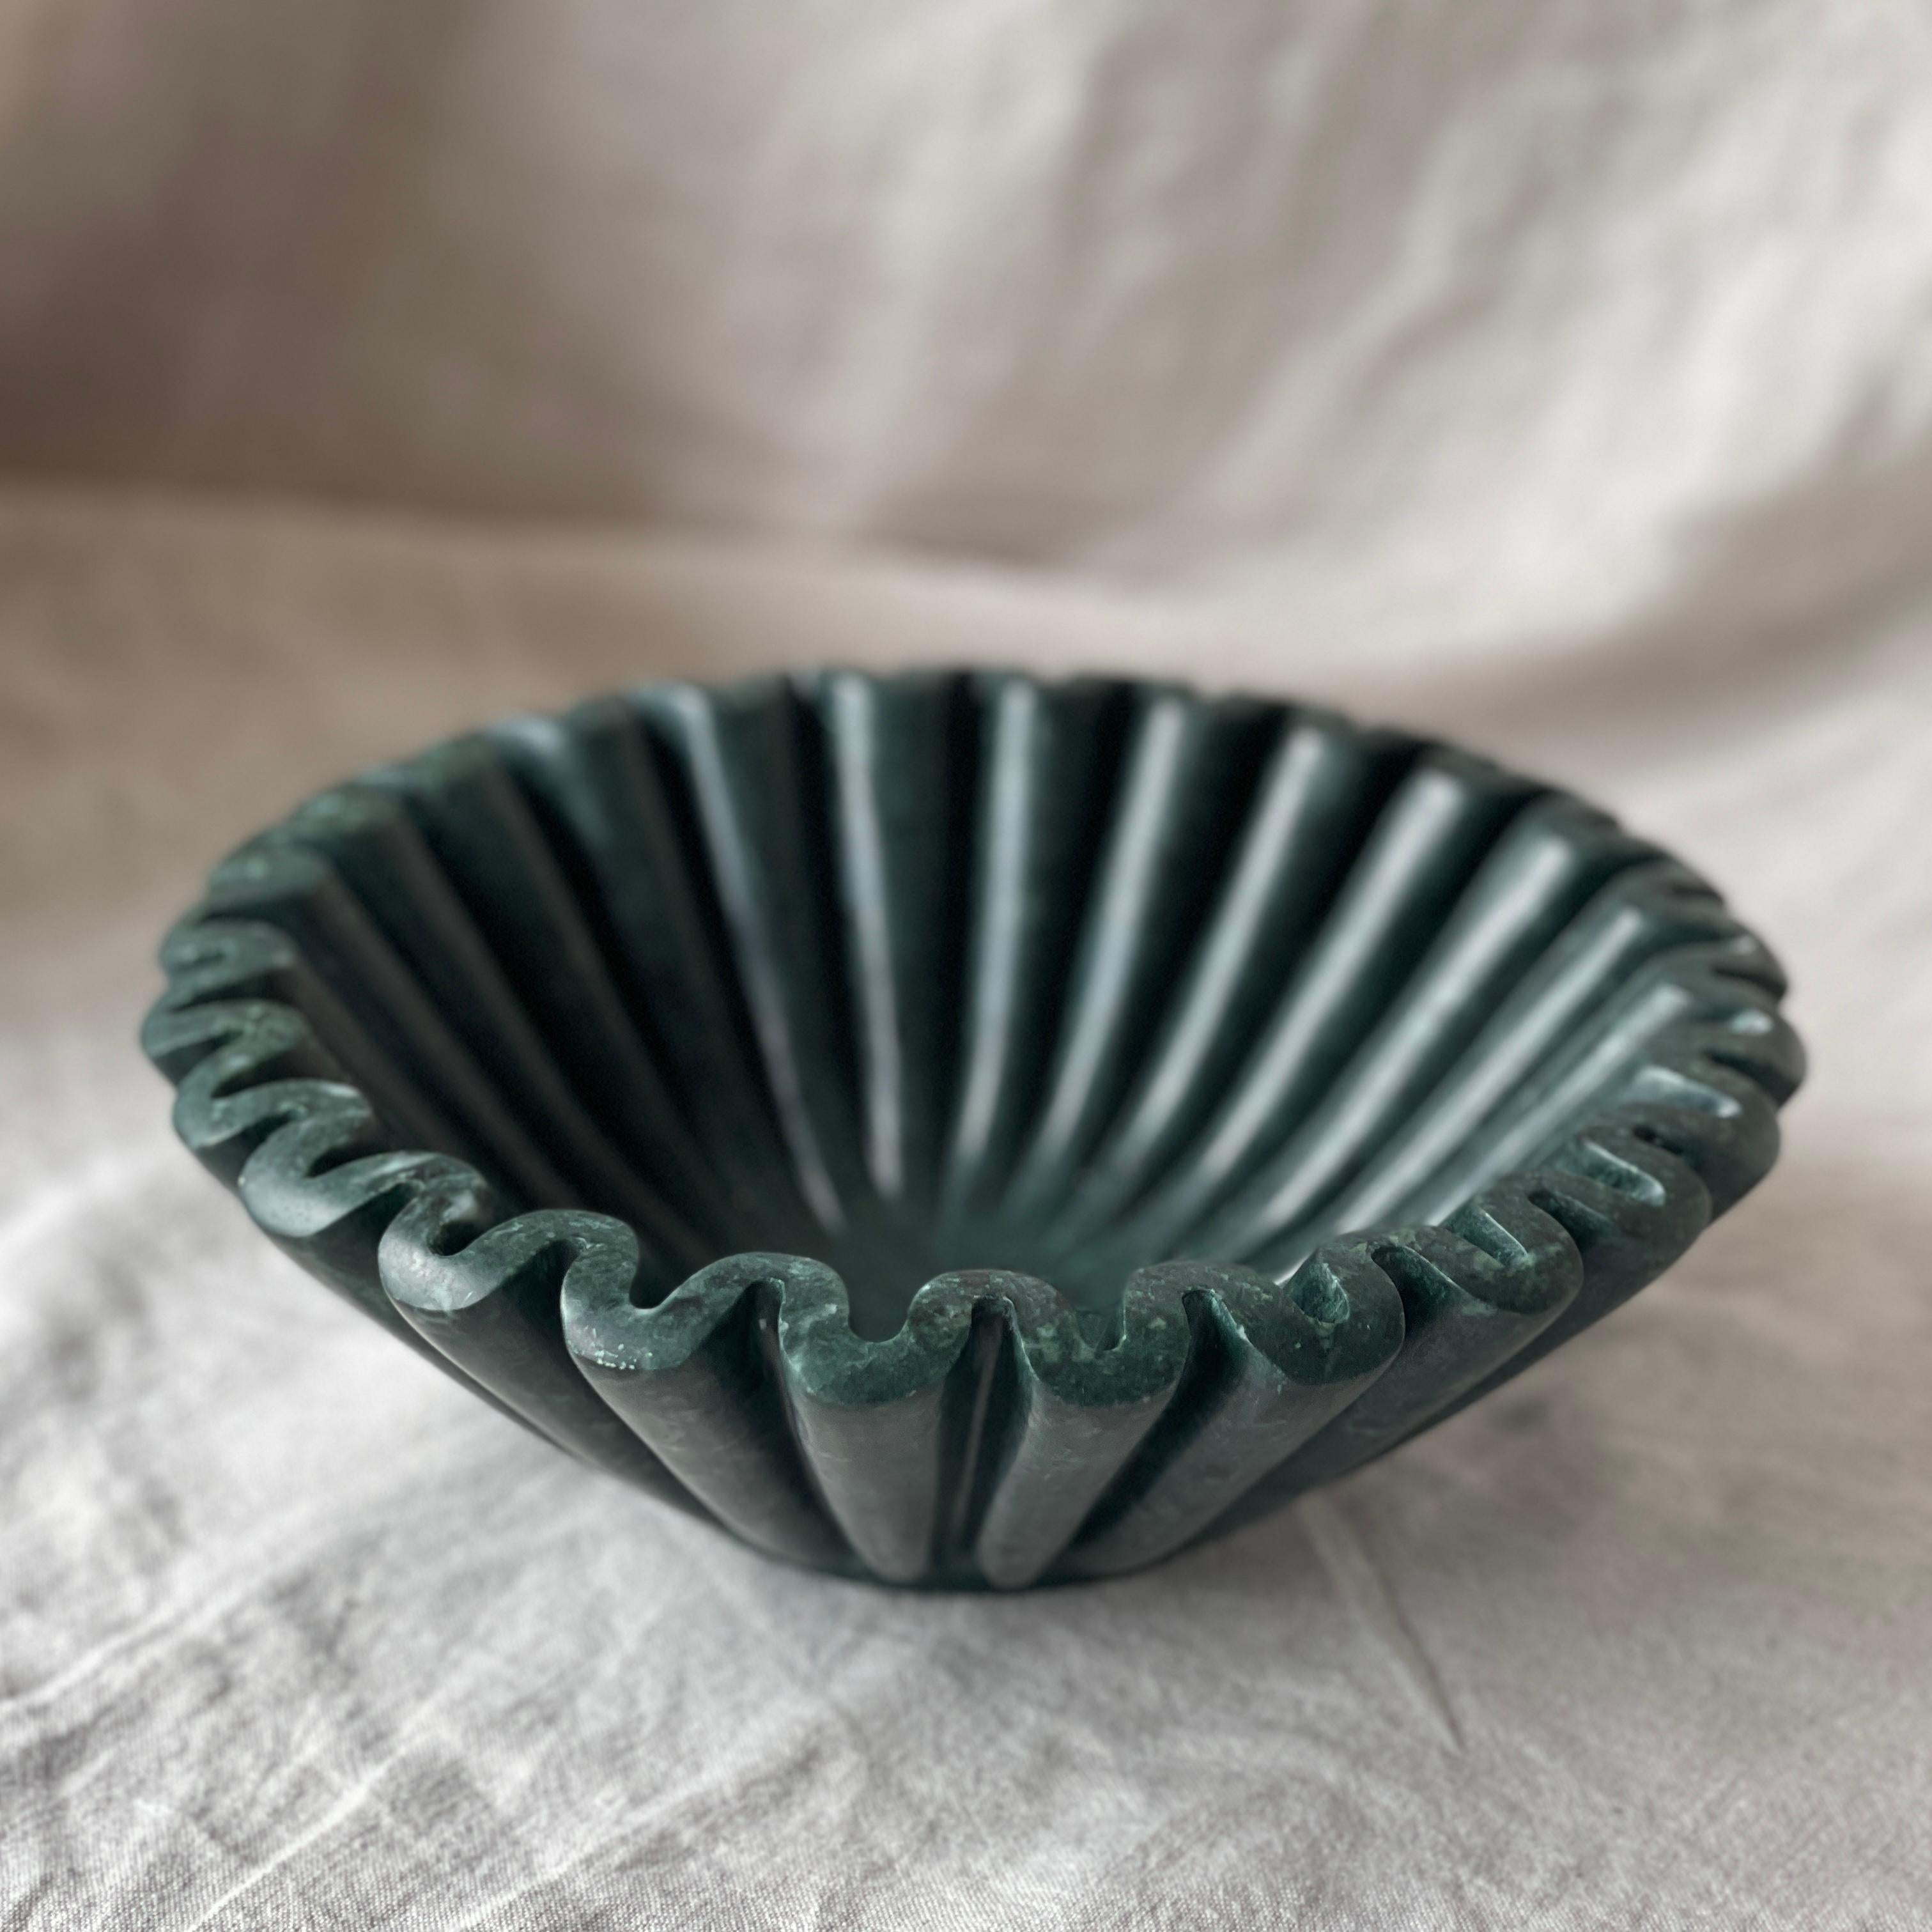 Ruffle Bowl is a limited edition functional object d'art carved from a single cube of Dark Green Emerald Marble. Hand-finished by a growing artisan atelier in Rajasthan, India it is produced exclusively by Anastasio Home. With its gently folded